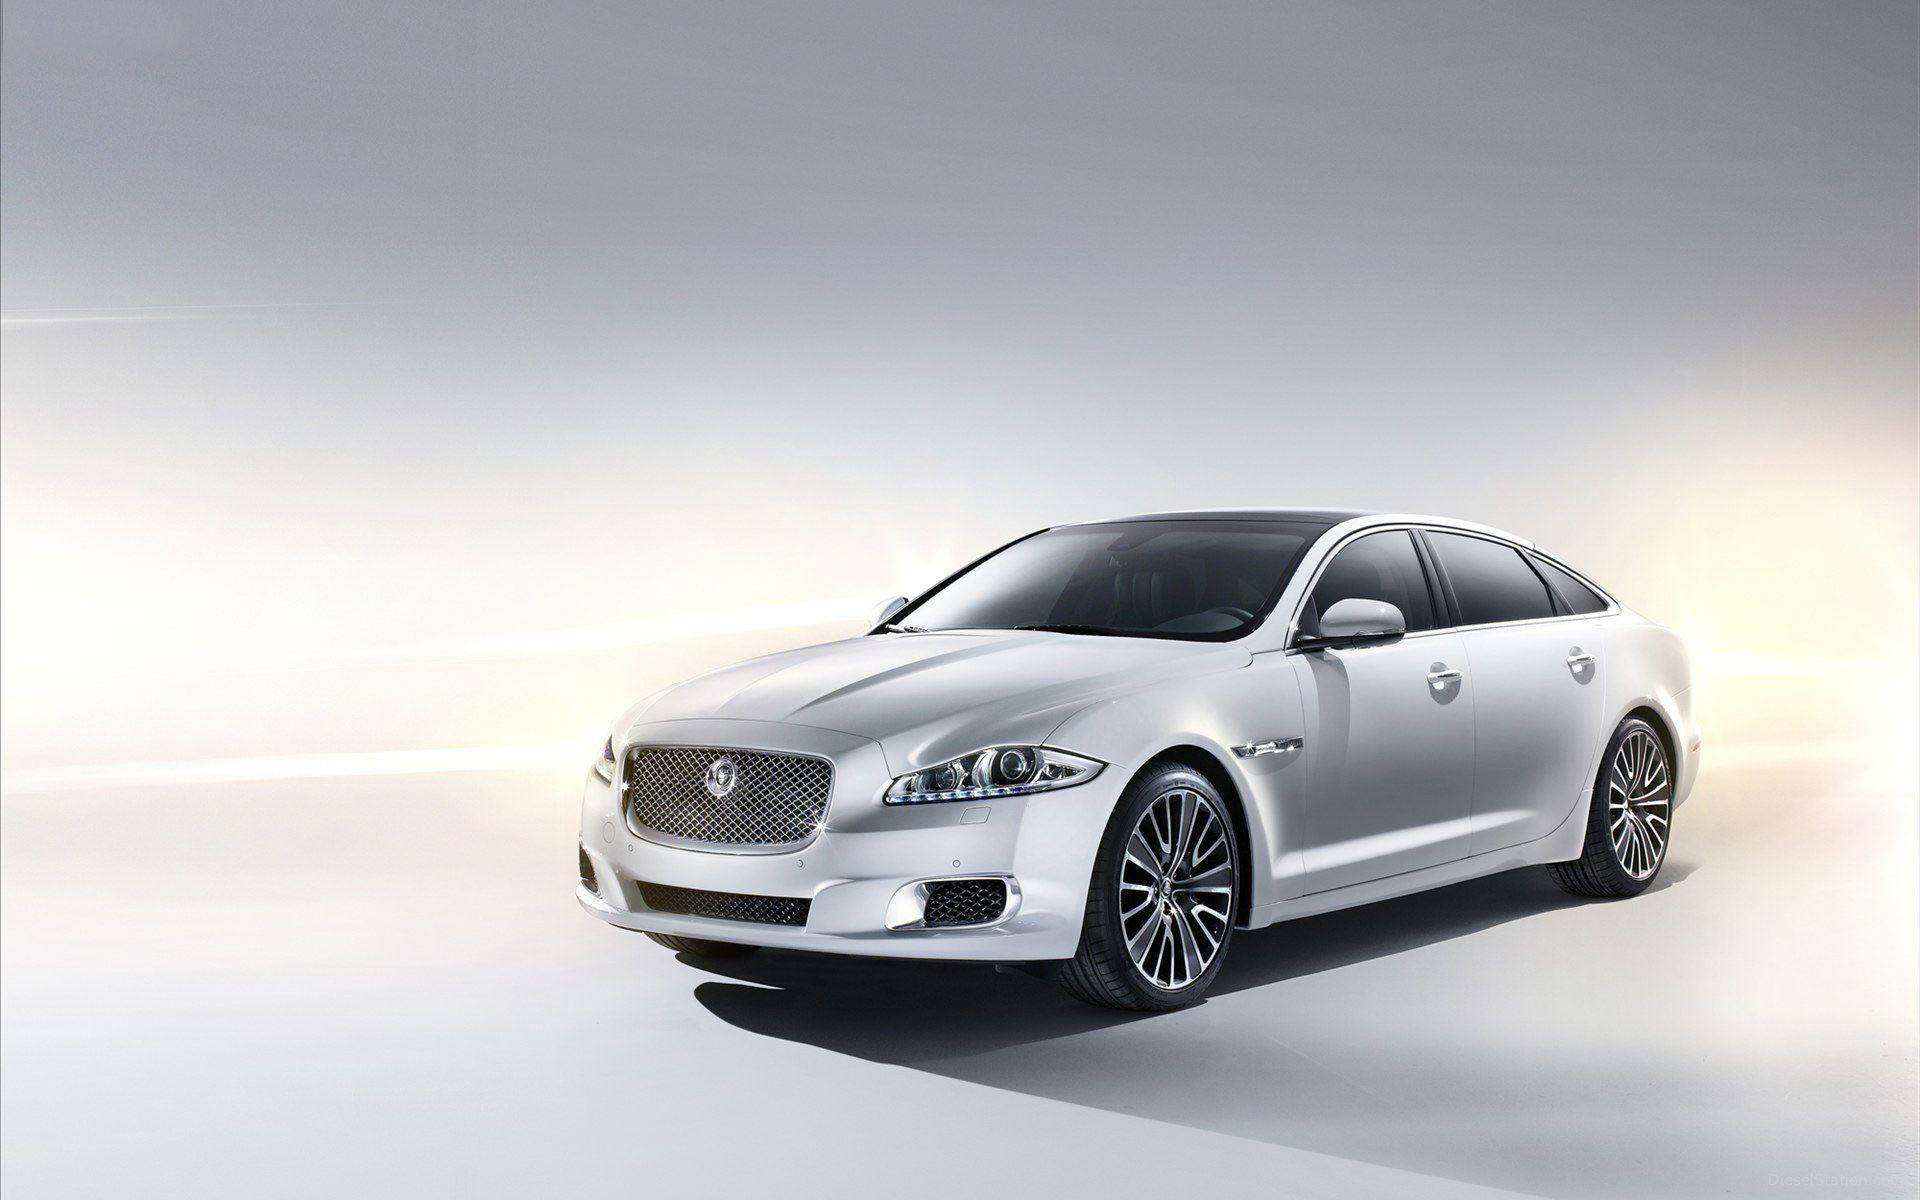 Get Ready For The Road With A Shiny Silver Jaguar Background